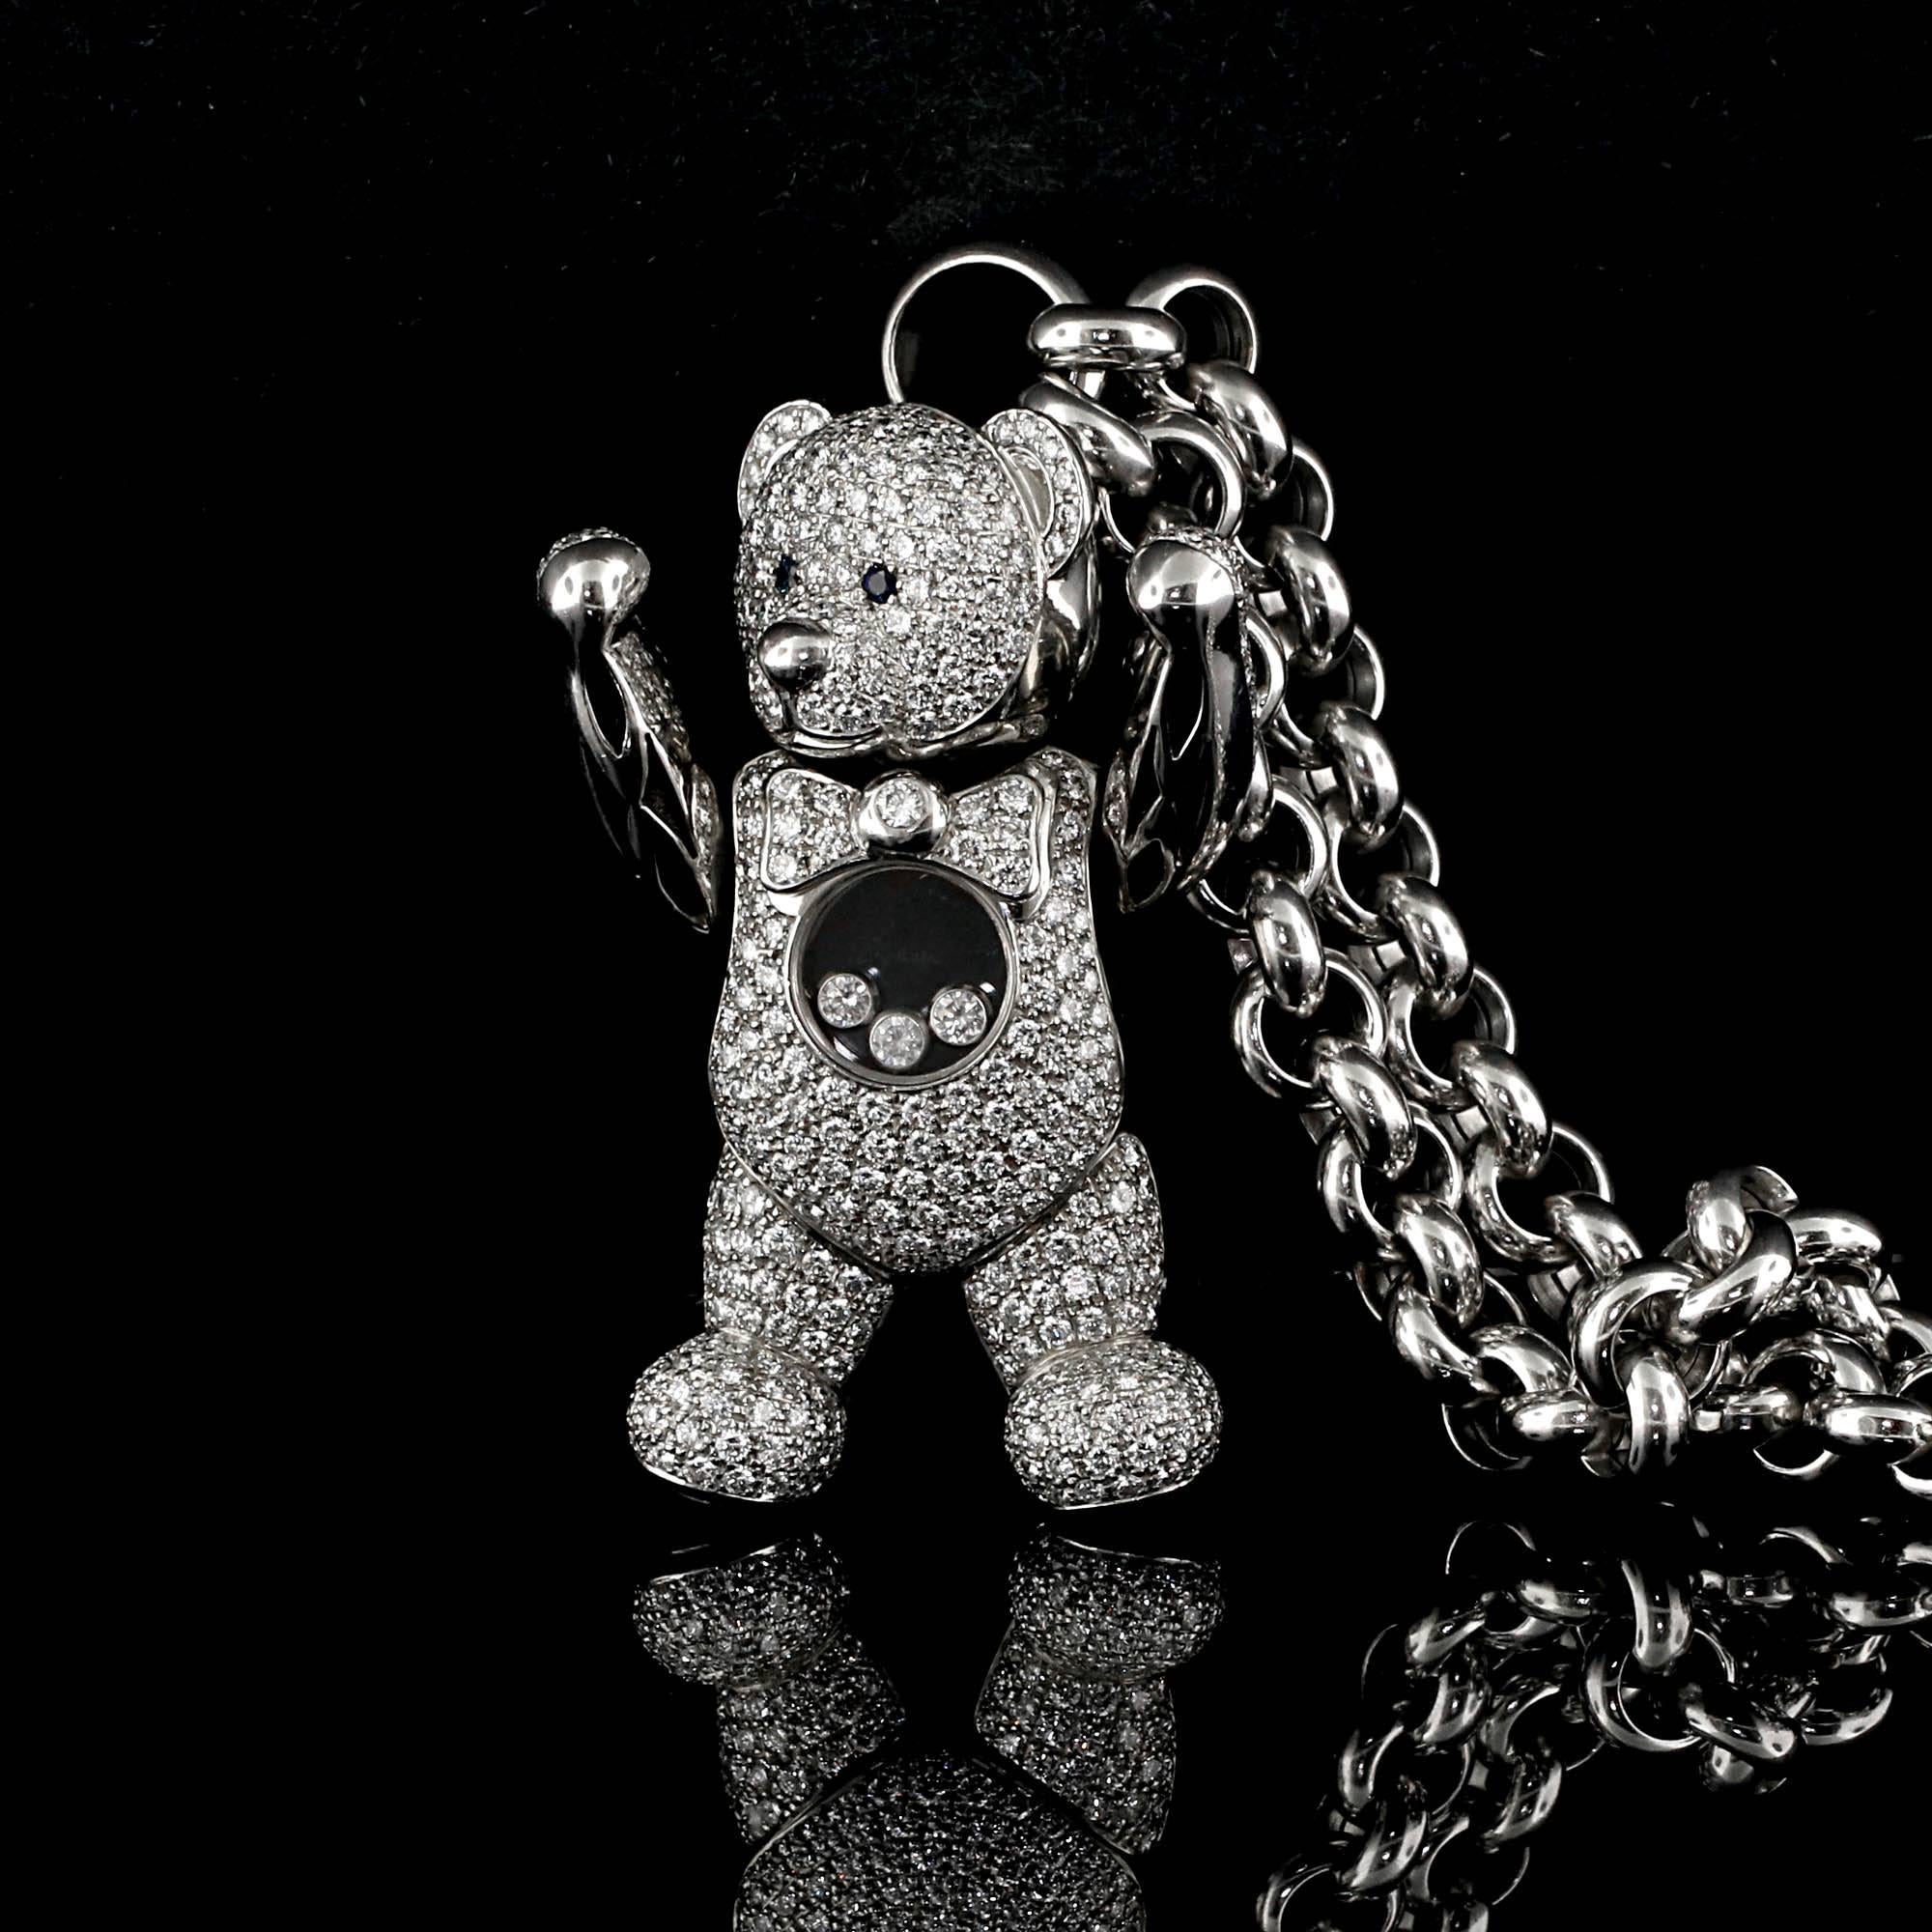 
Filled with 3 happy diamonds, this movable dancing bear necklace is adorned with over 8 carats of diamonds and .04 carats of sapphire. The sapphires are located in the eyes where as the diamonds cover the entire front of the pendant. The hands on